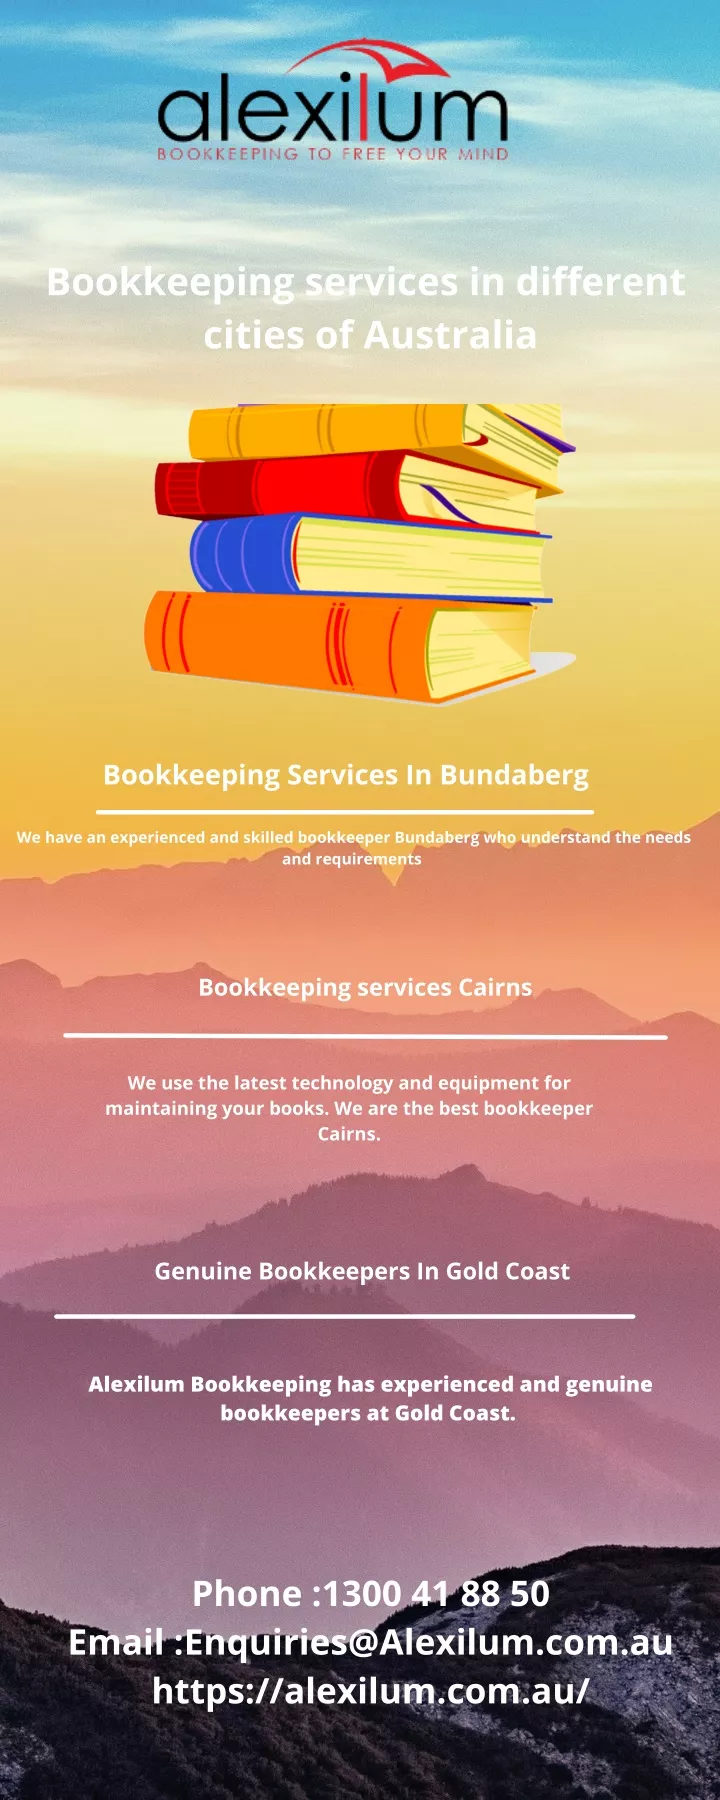 bookkeeping services in different cities